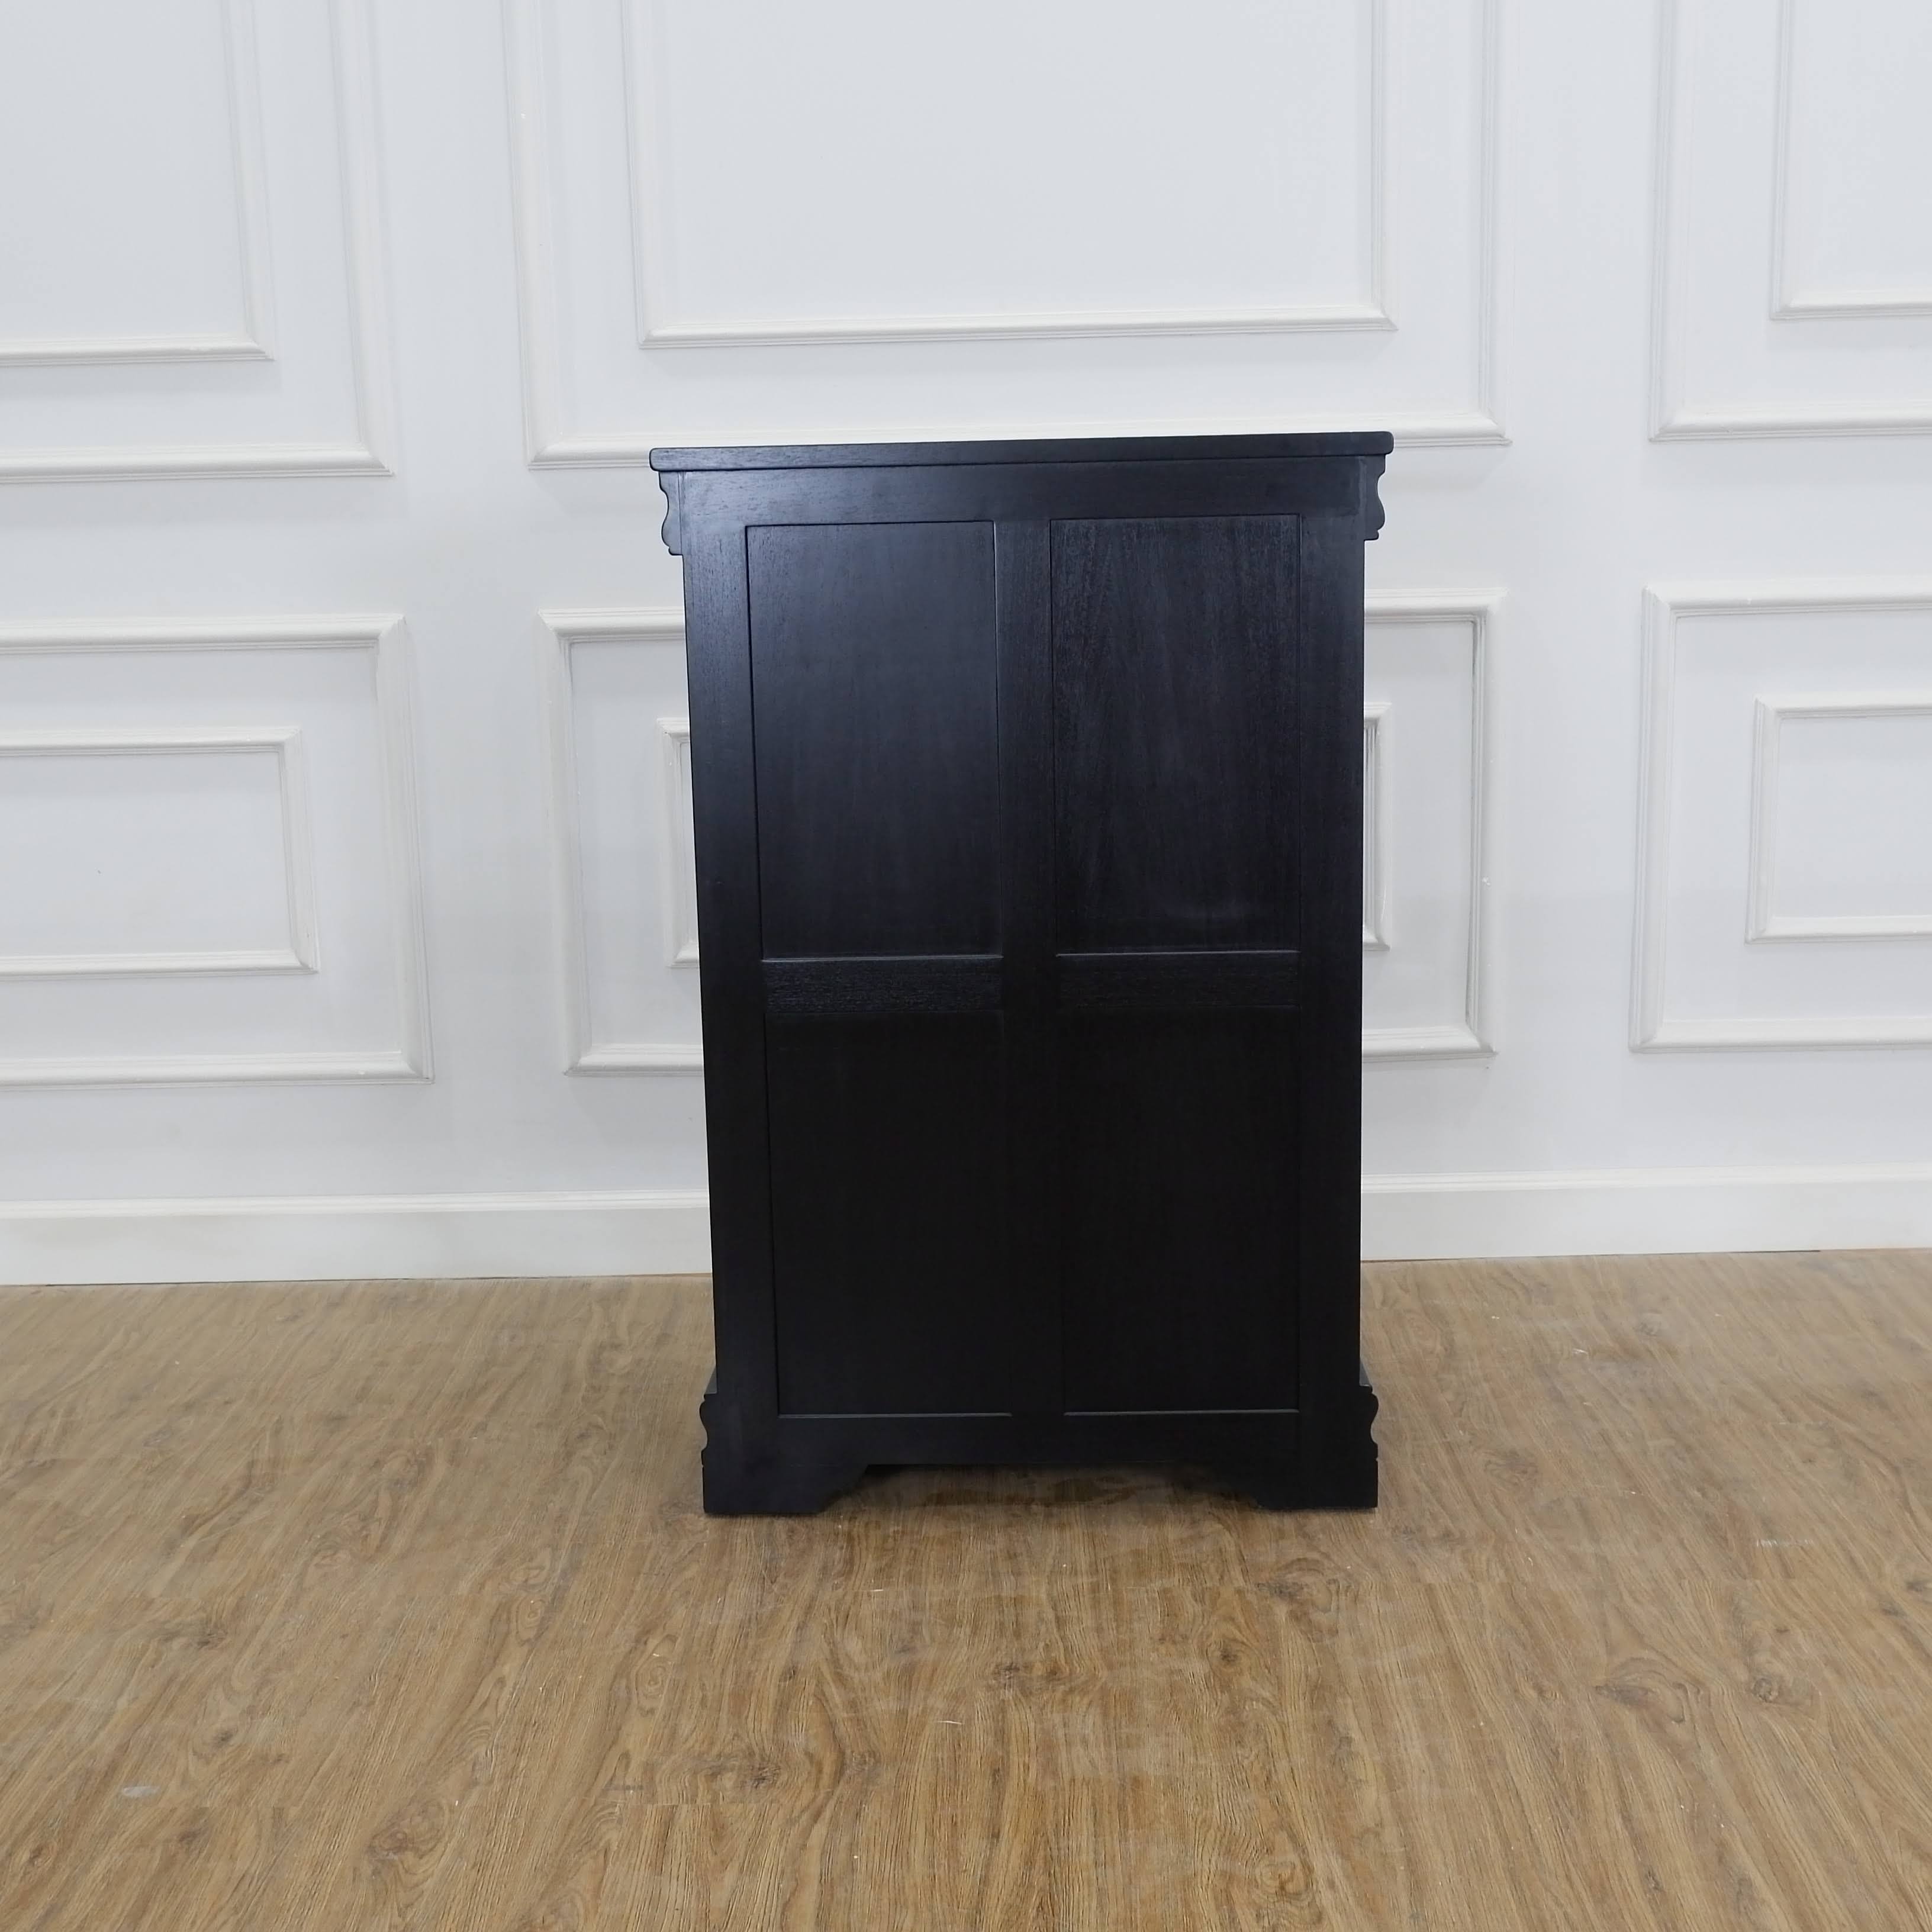 Louis Philippe Chest Of Drawers - Black